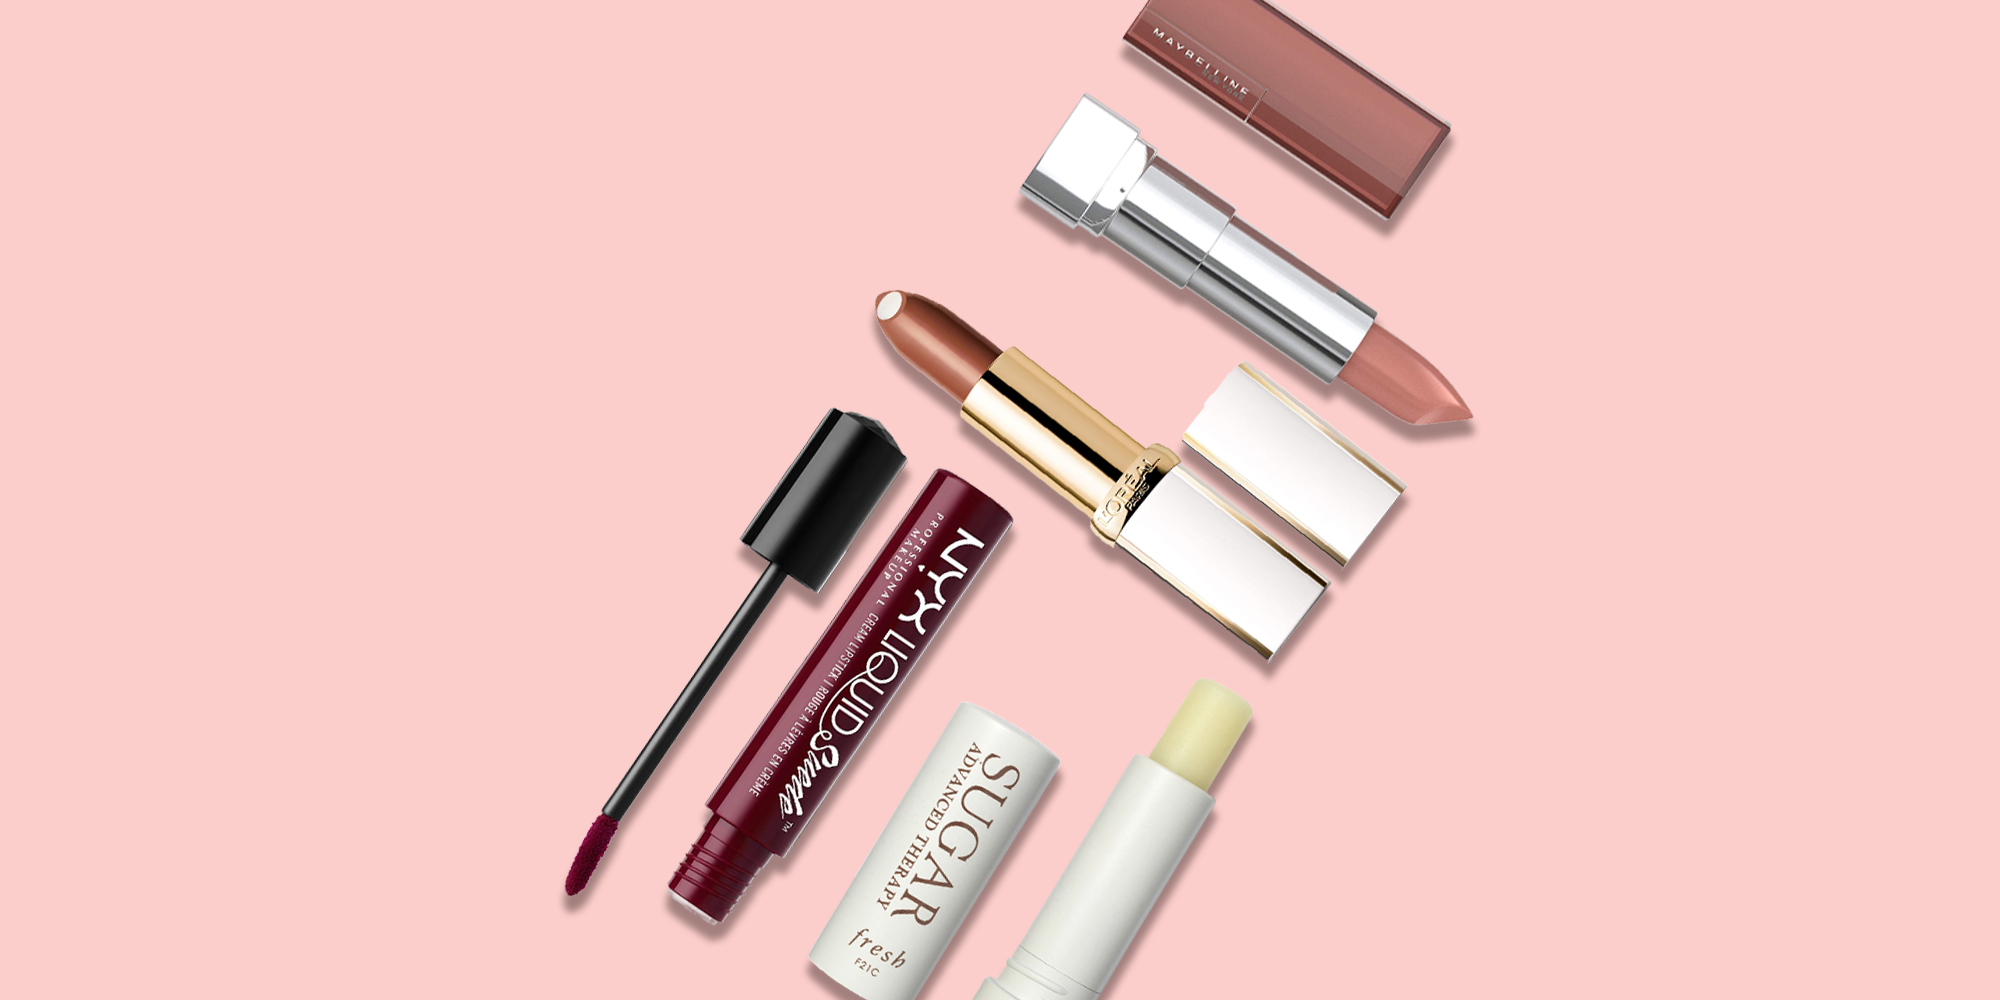 17 Best Lipsticks and Products Top Lip Color, Balm, Gloss & More